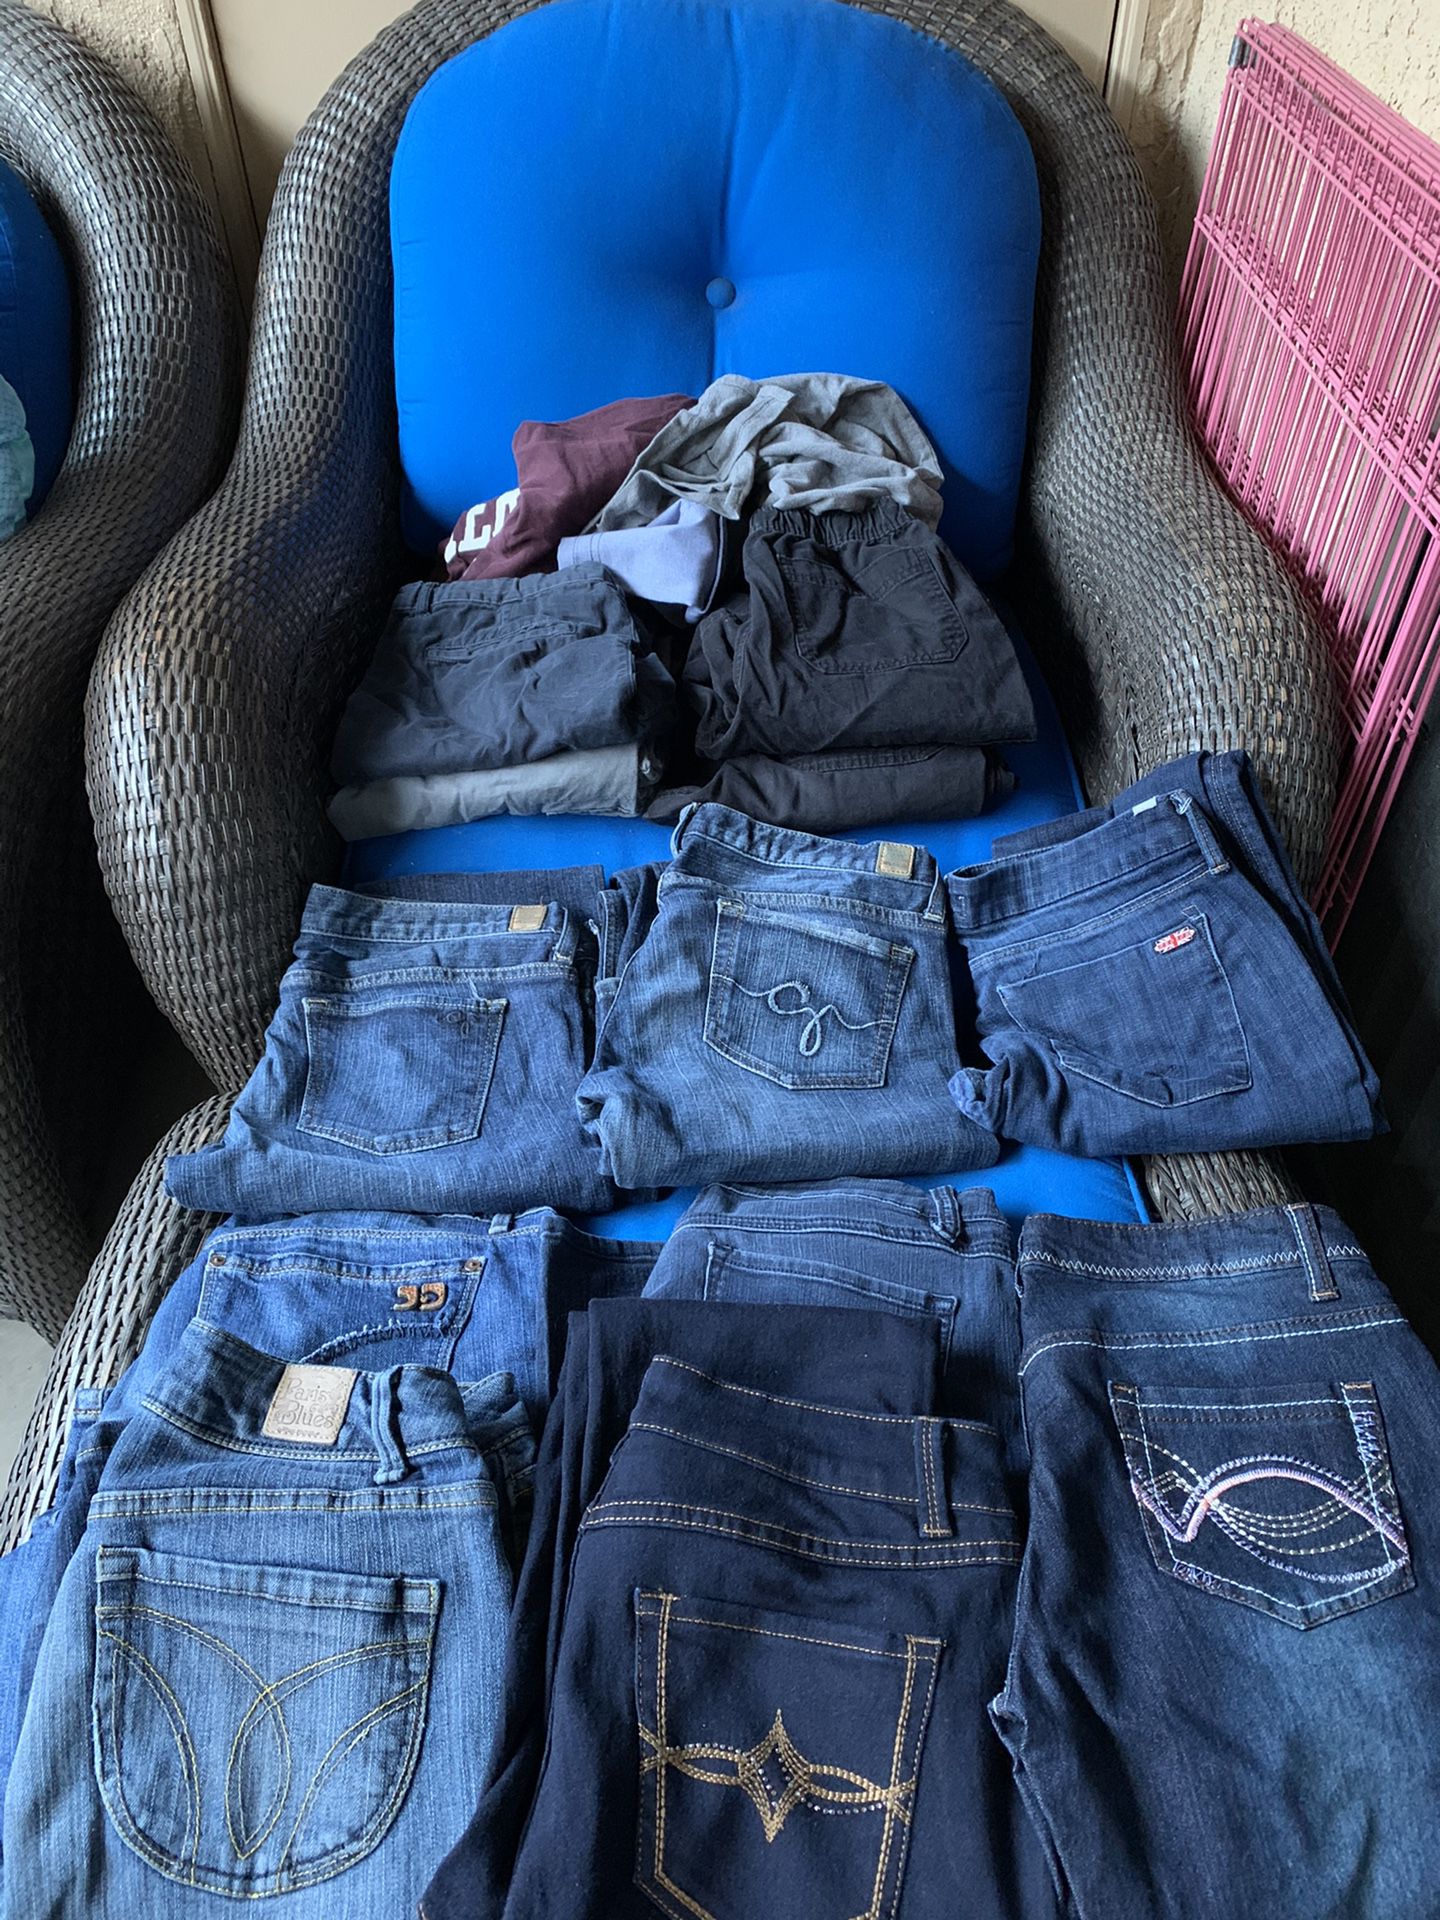 Jeans, shoes and kids clothes